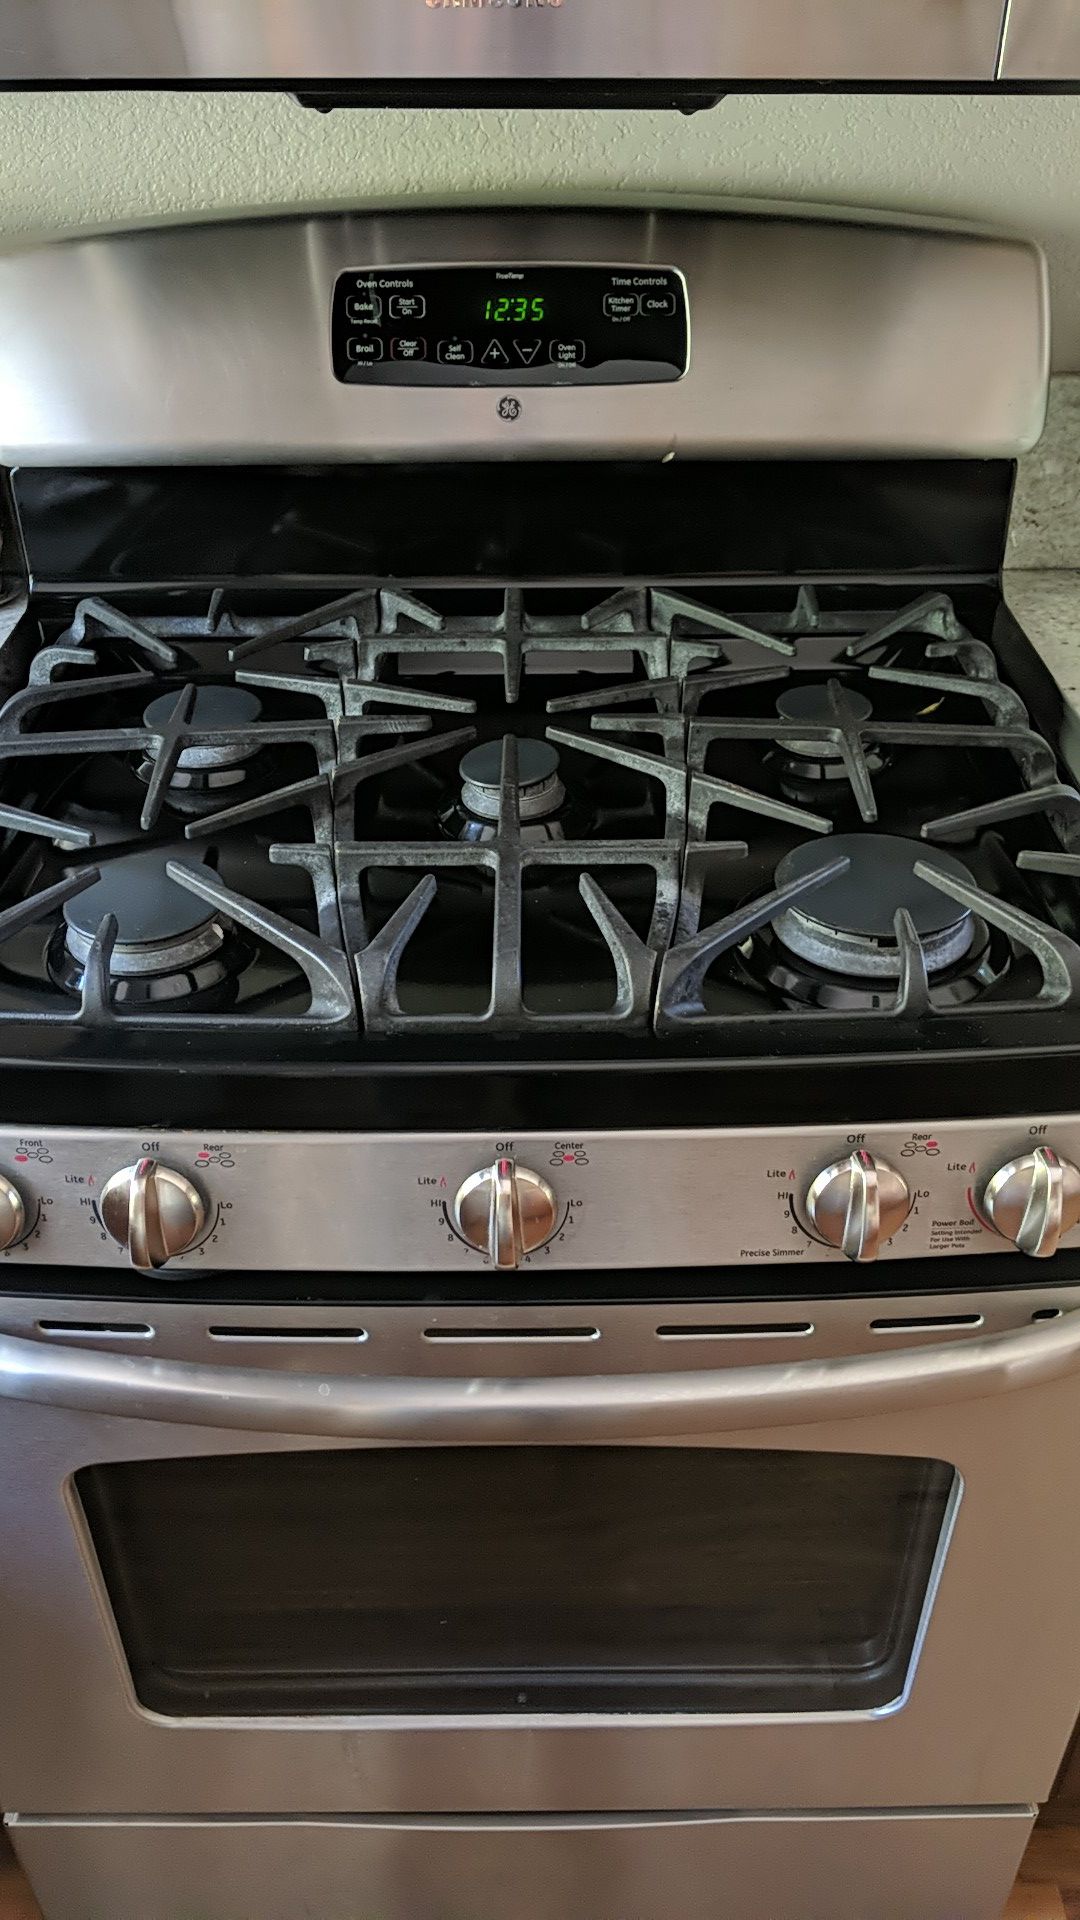 General Electric Gas Stove Oven